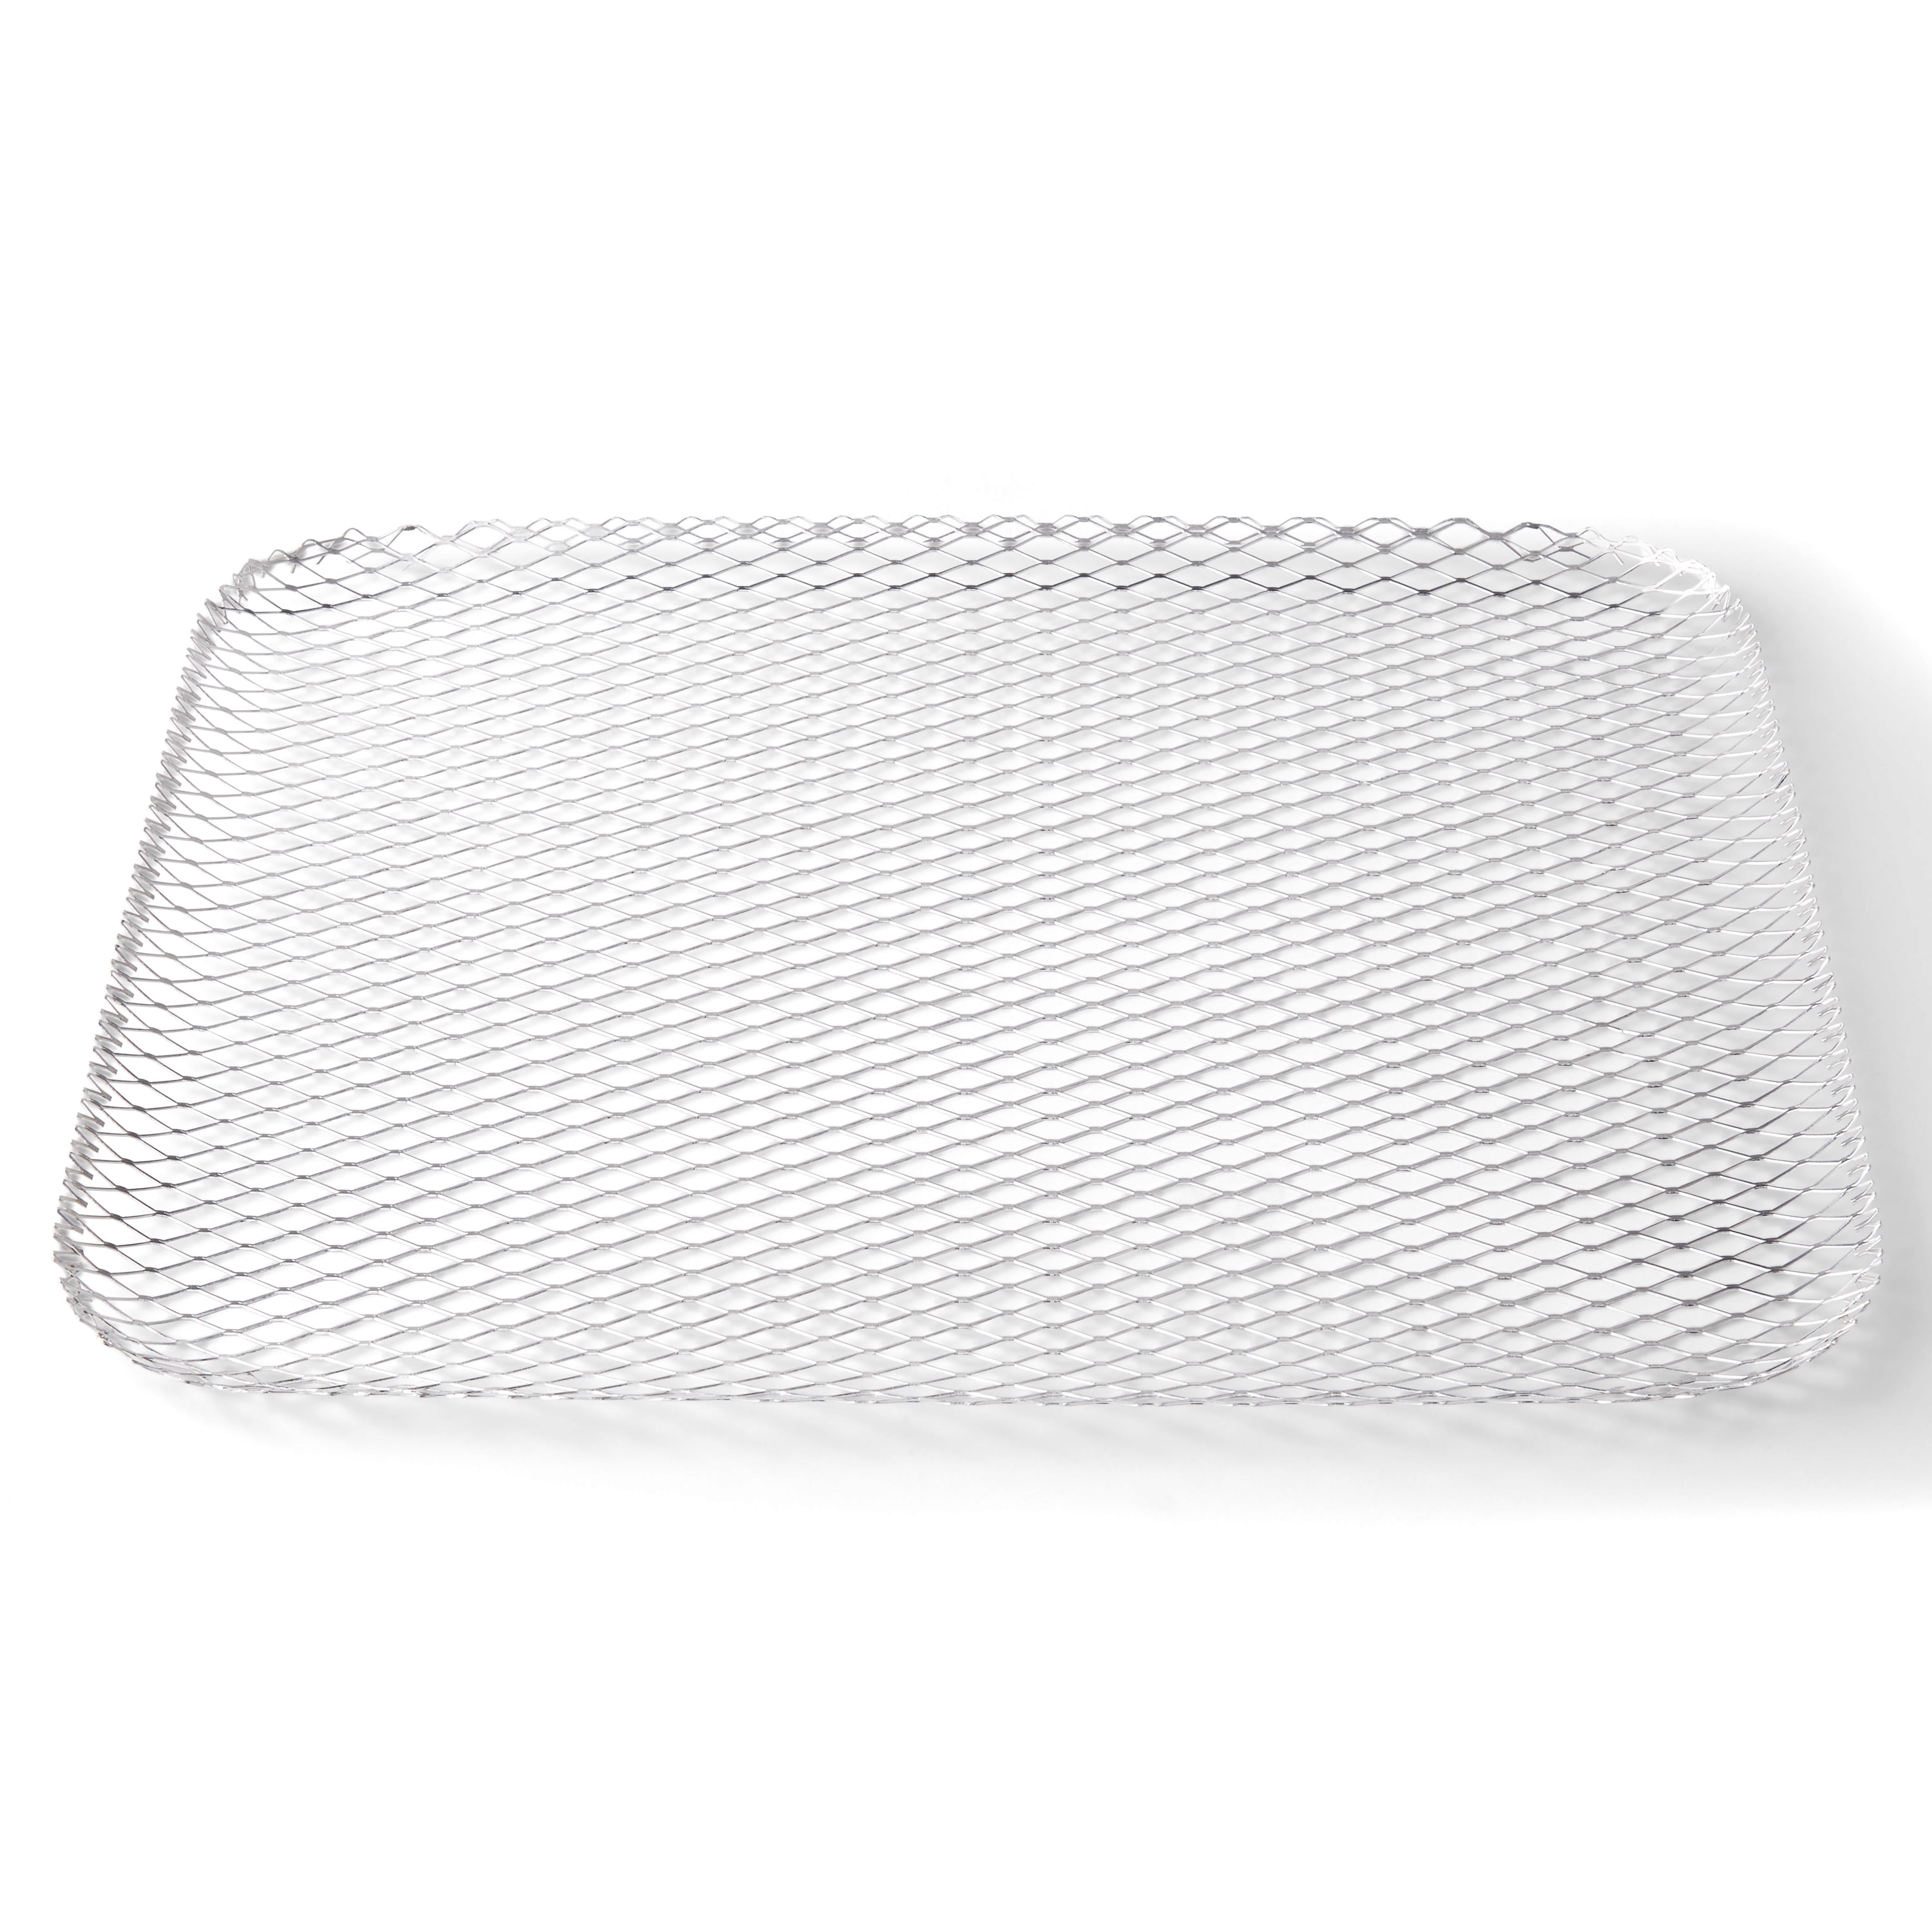 16” x 12” Disposable Grill Topper - Oscarware Inc